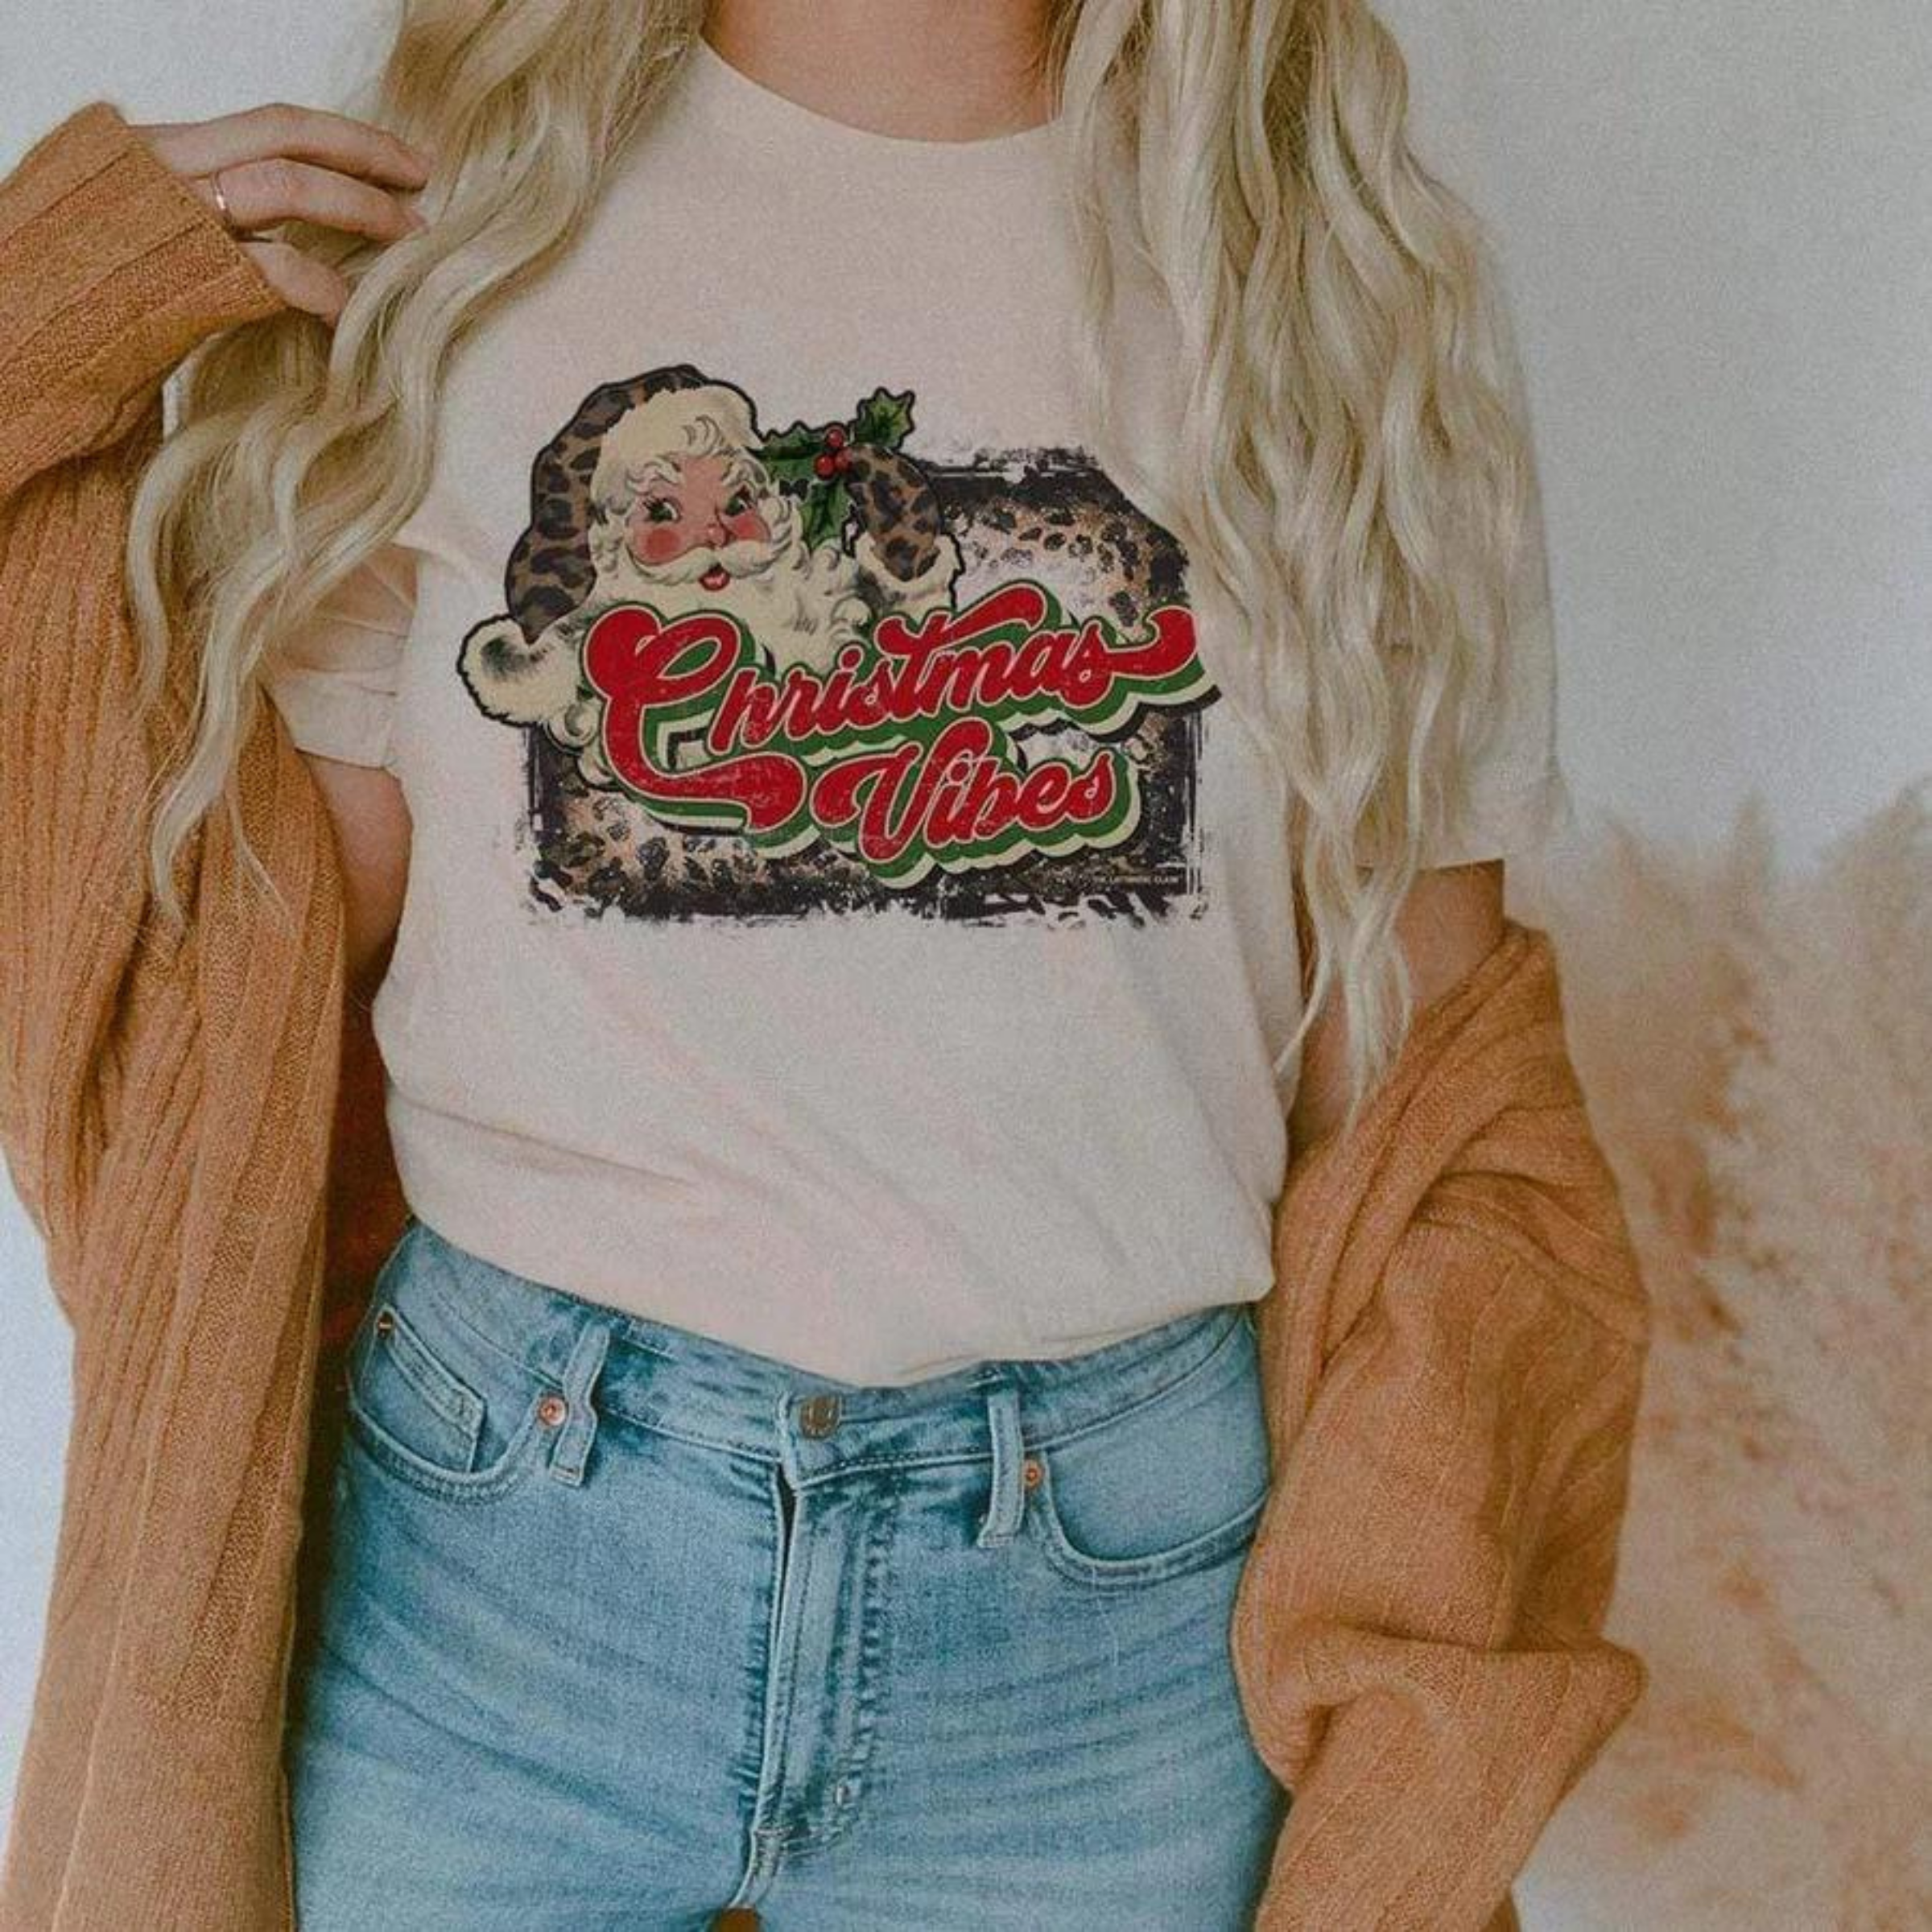 This cream tee includes a crew neckline, short sleeves, and a cute Christmas graphic that says "Christmas Vibes" in a red and green cursive font. There is a Santa Clause wearing a leopard hat and glove, as well as a bleached leopard background behind the saying and Mr. Clause. The model has this graphic tee styled with rolled sleeves, a camel cardigan, and a light wash pair of denim jeans. 